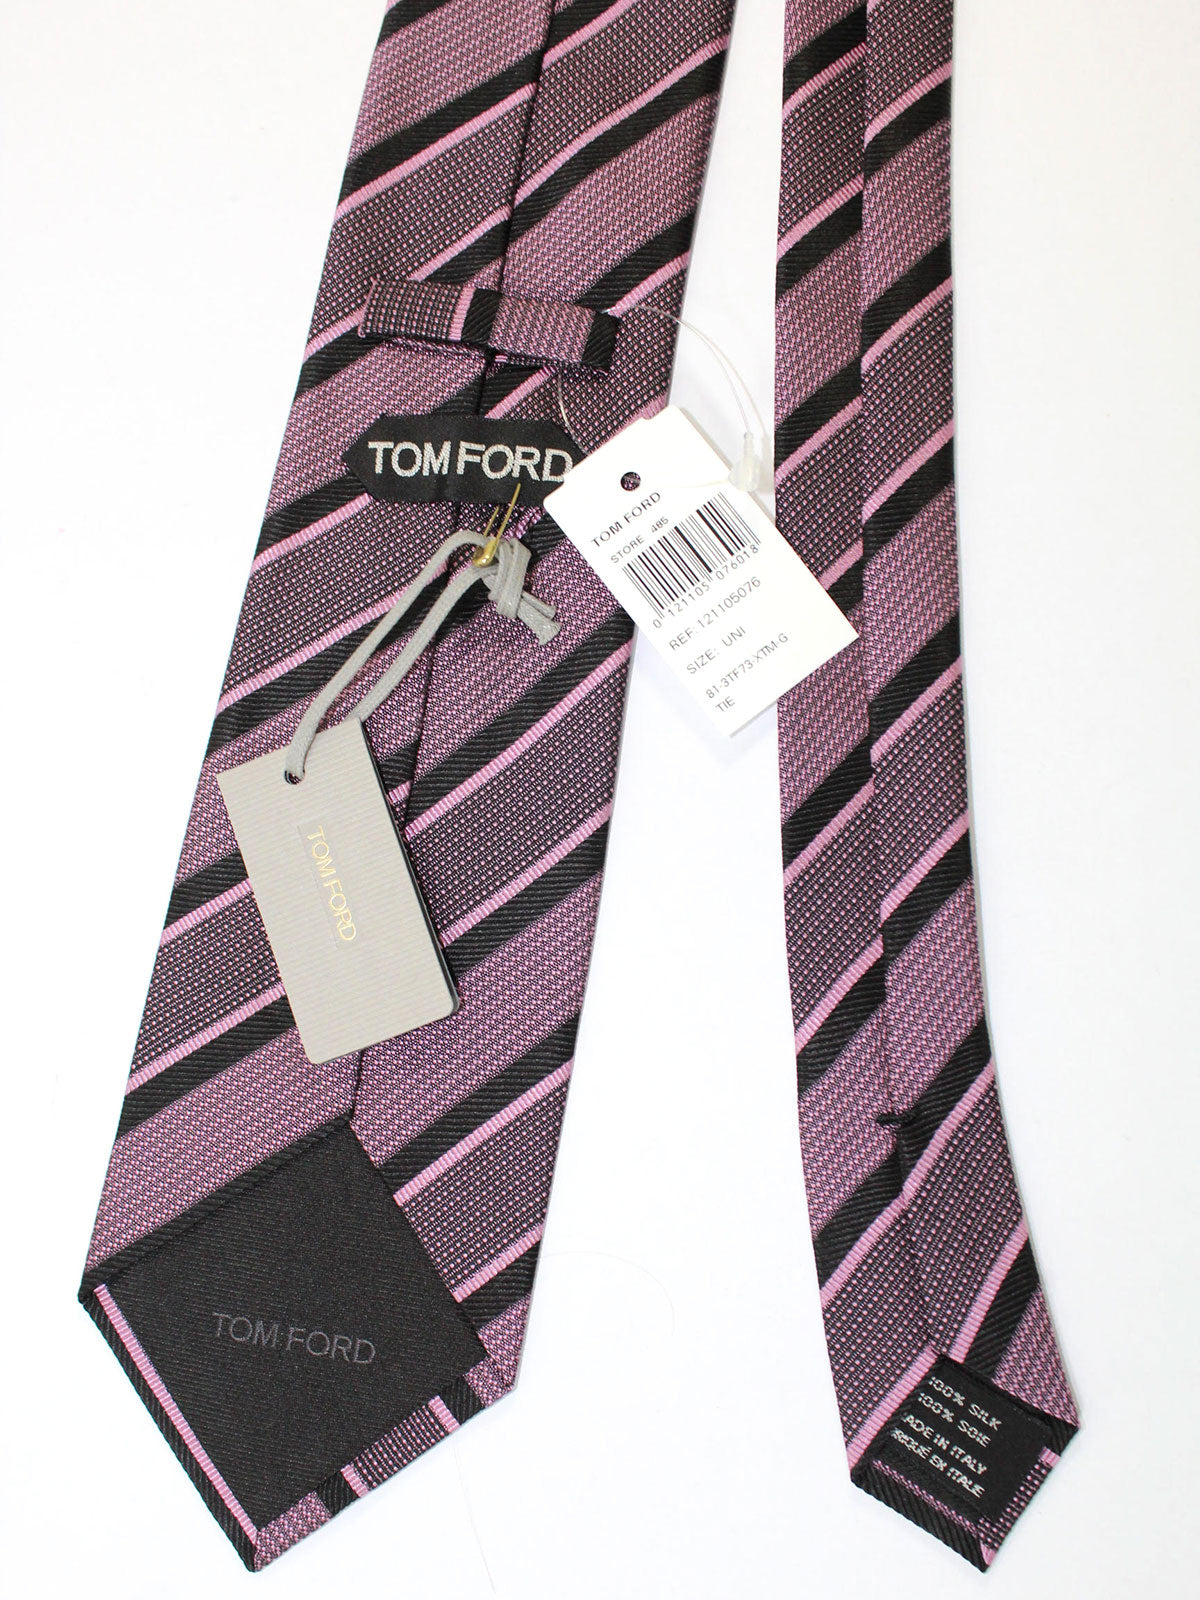 Tom Ford Ties Sale | Bow Ties | Dress Shirts SALE Page 3 - Tie Deals